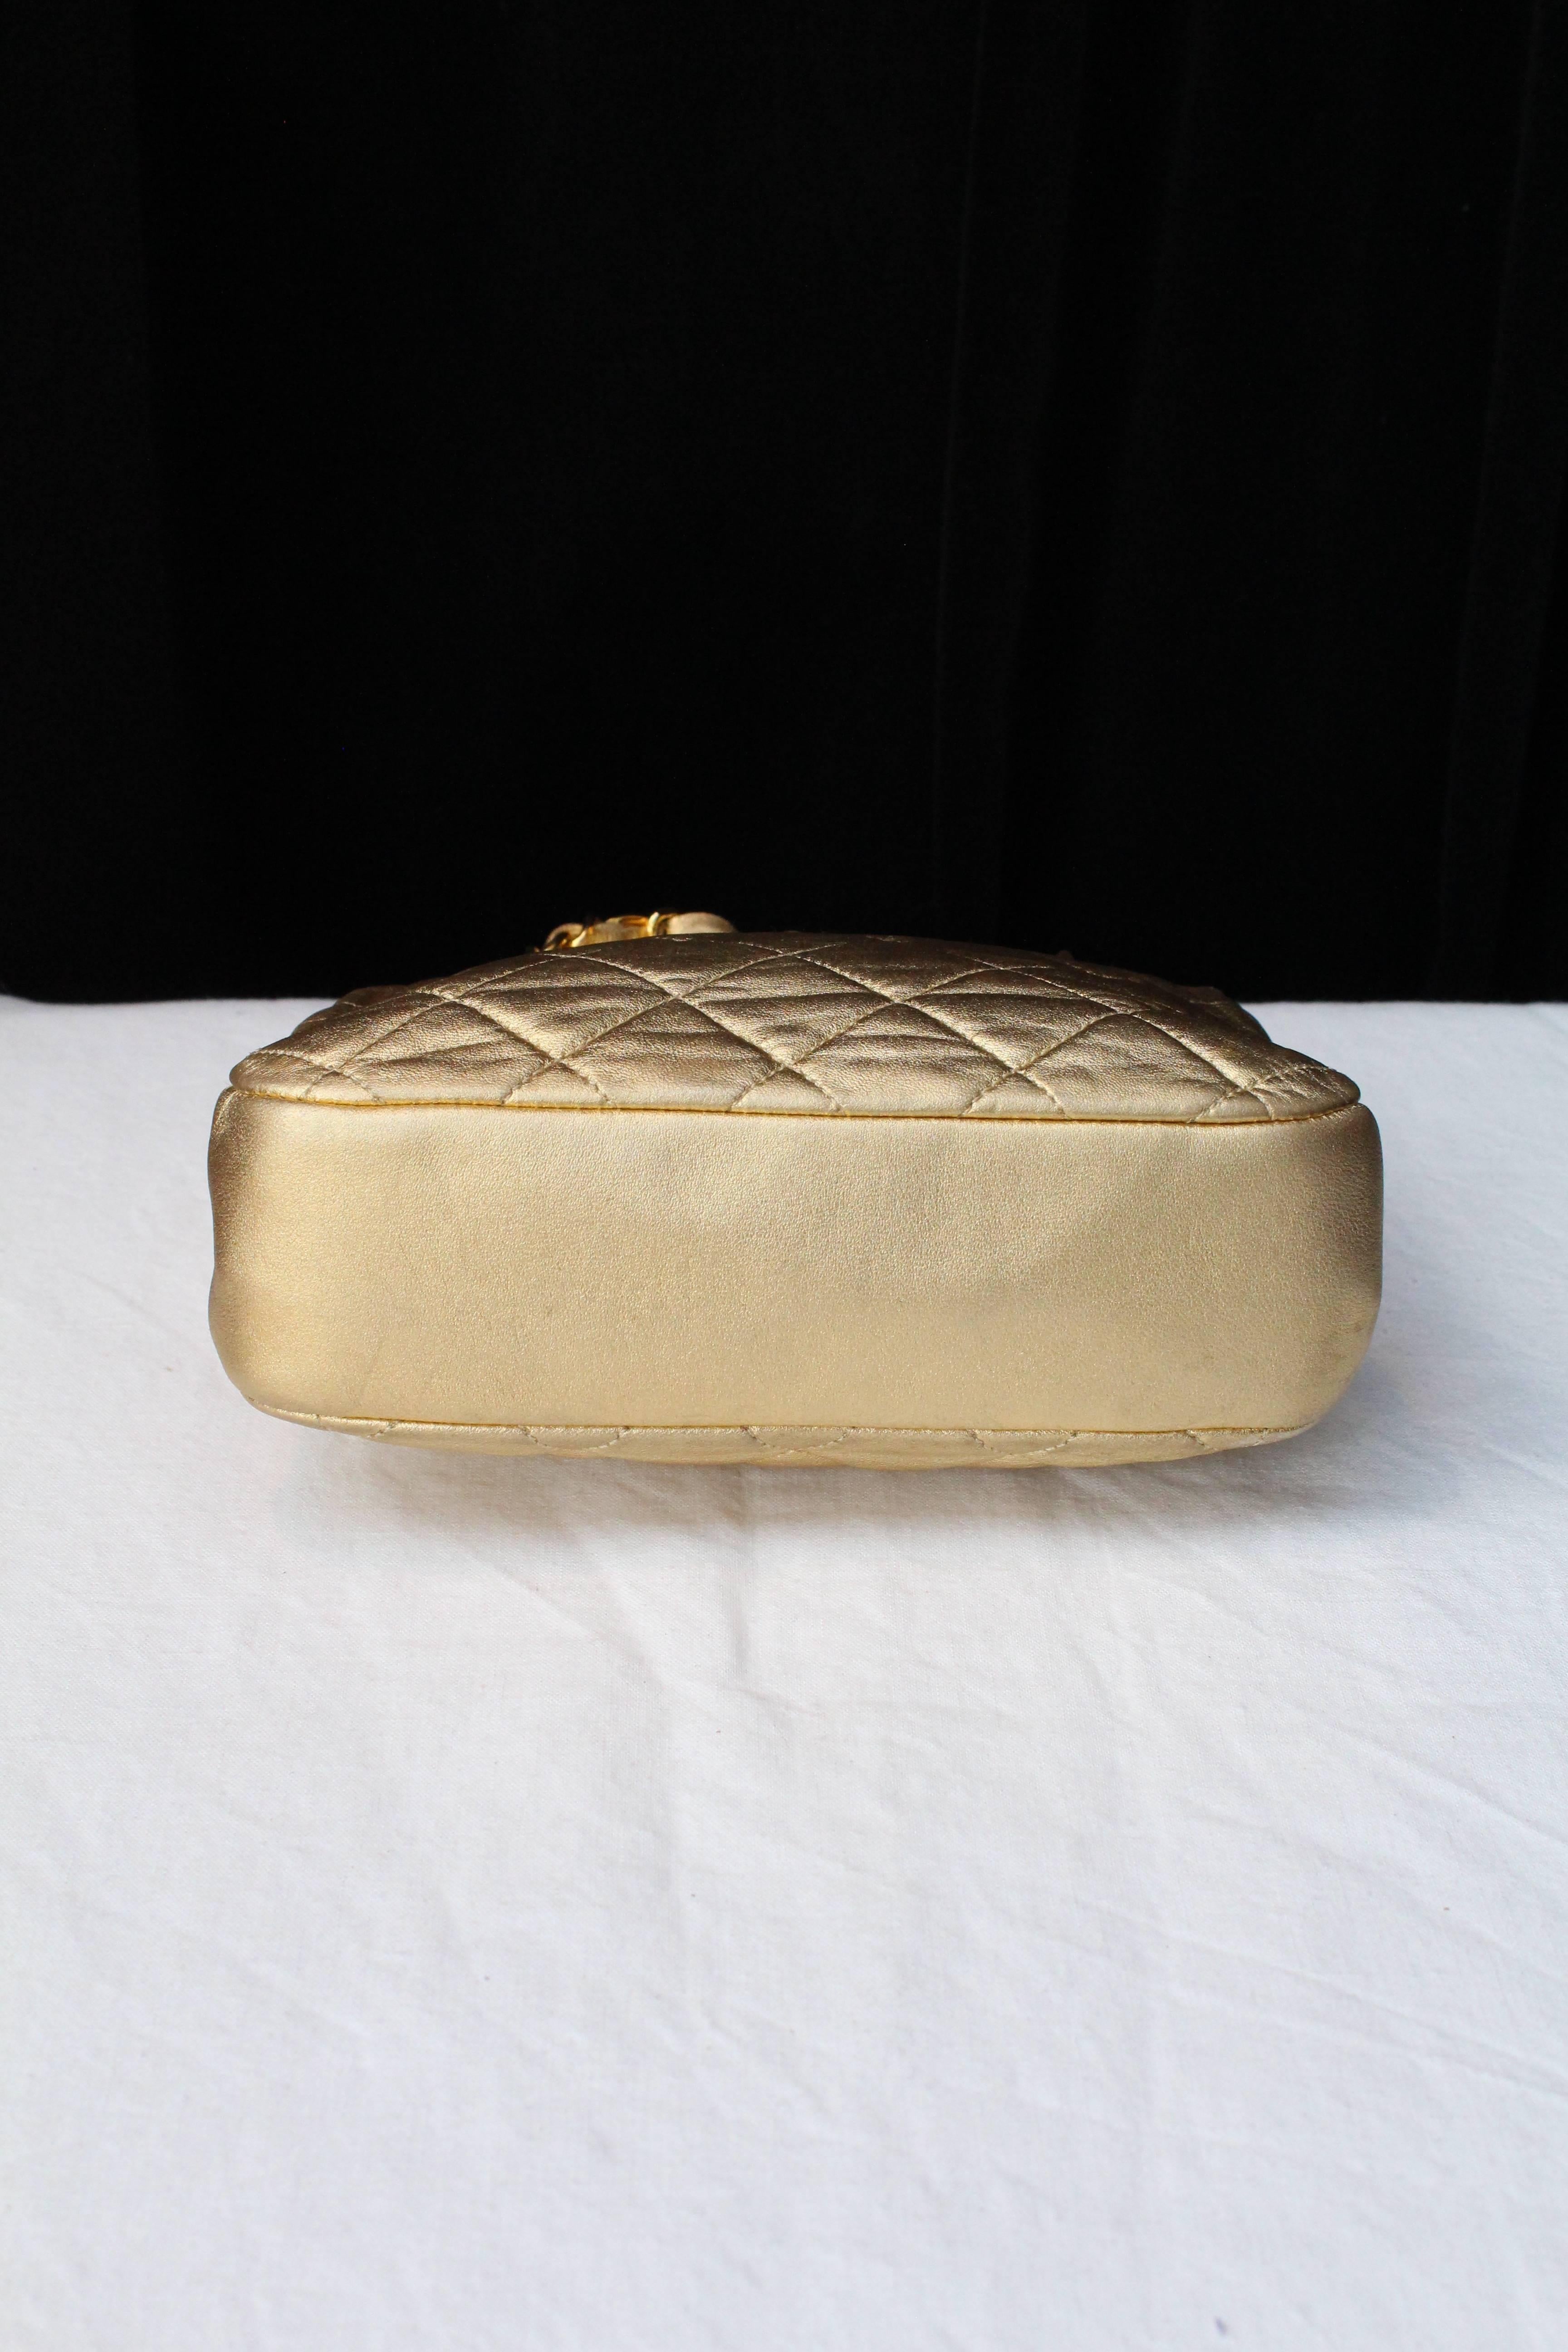 Chanel quilted golden leather small evening bag, 1980s  2